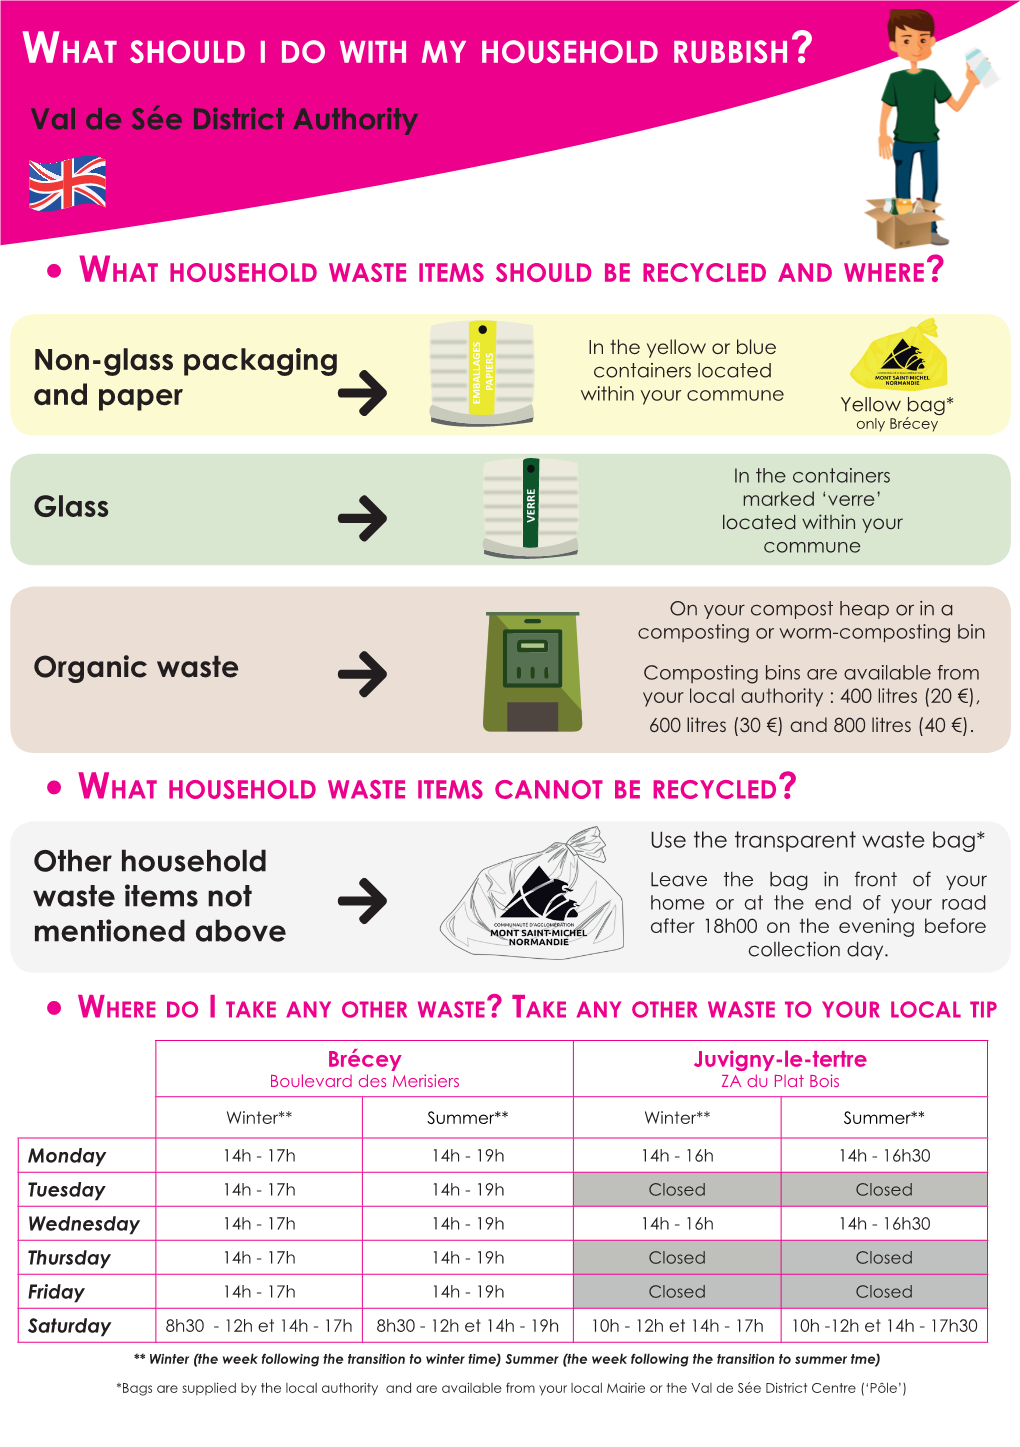 What Should I Do with My Household Rubbish?